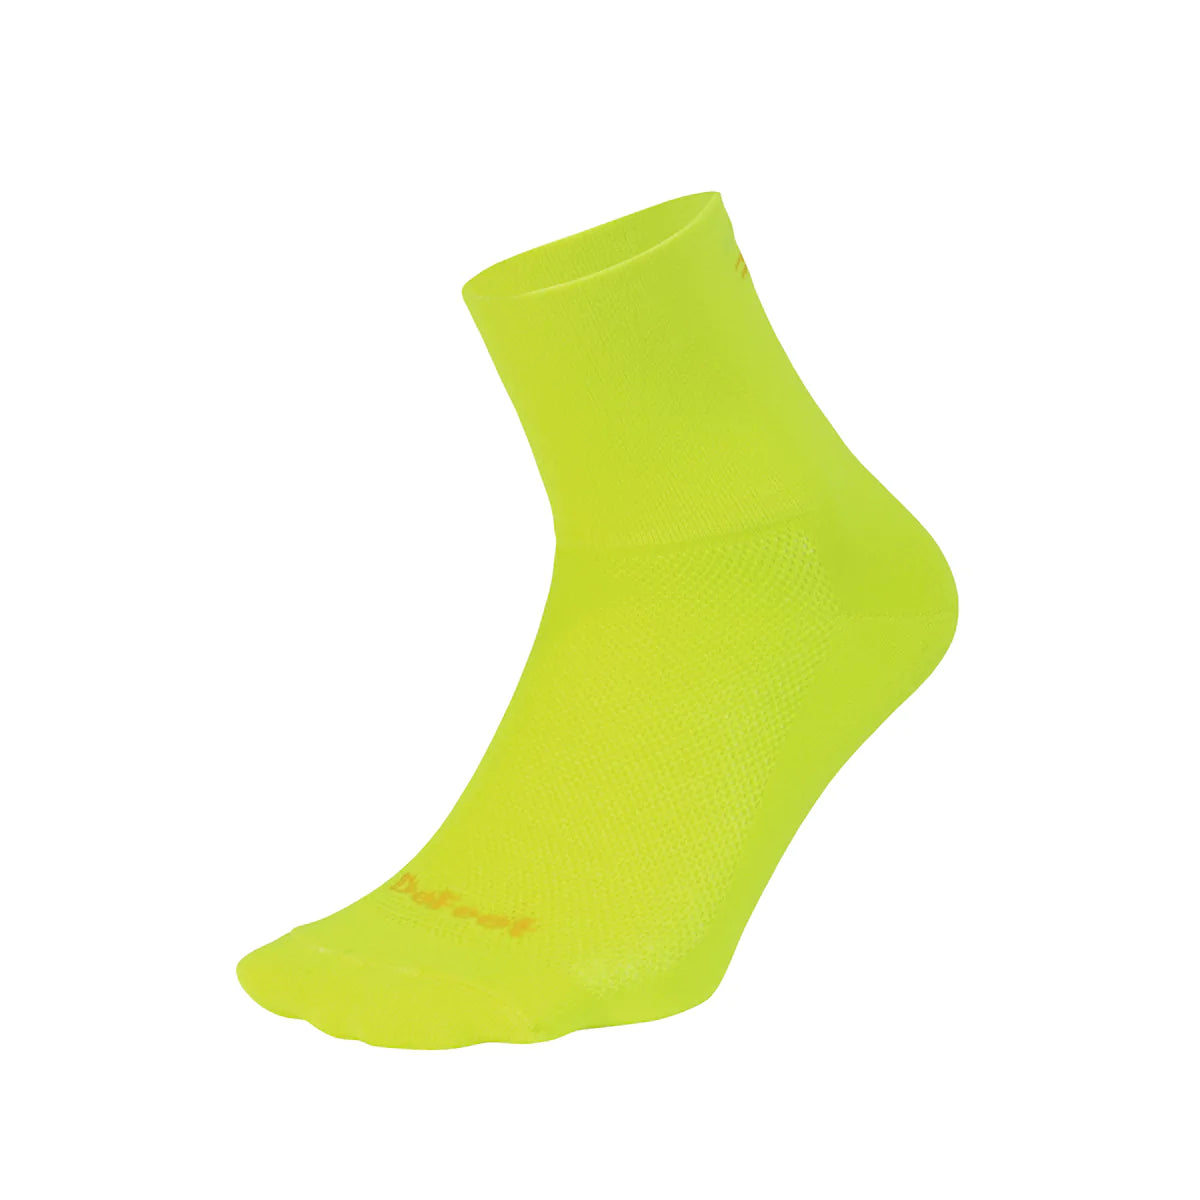 Aireator 3" cuff cycling sock in yellow with small tonal yellow d-logo on back of cuff